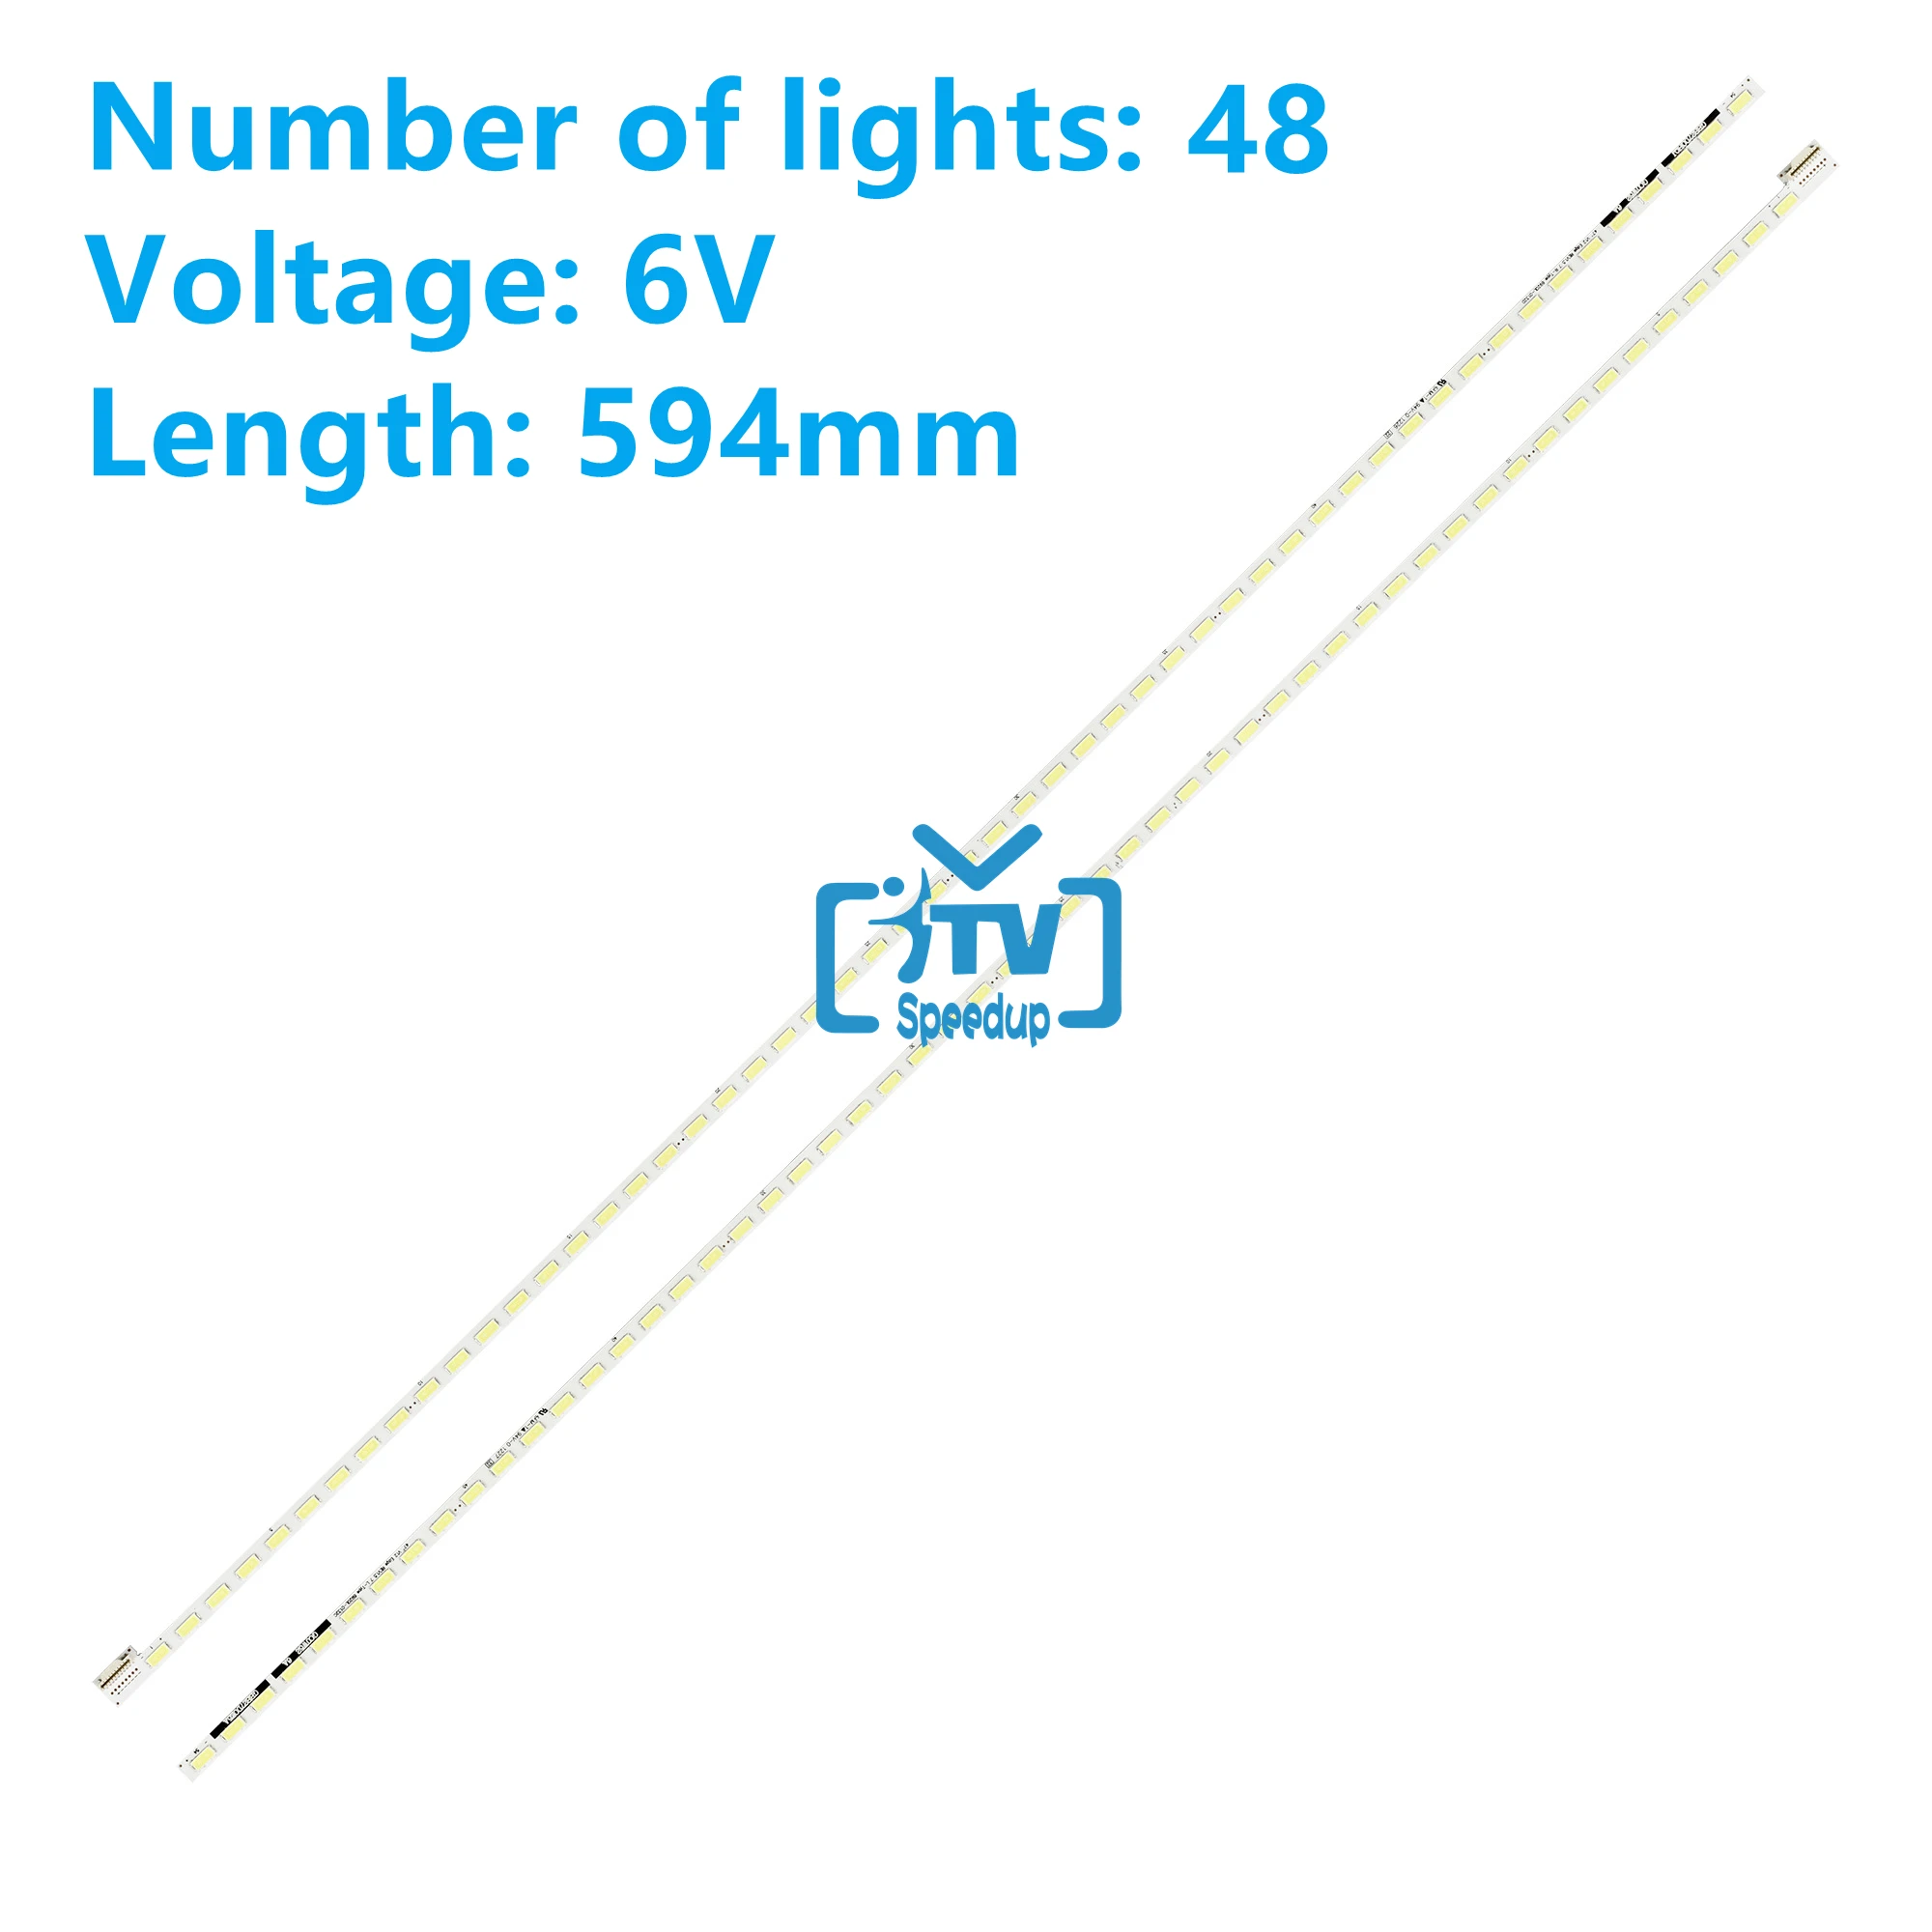 5set LED strip for 47PFL5007G 47PFL4007G LG 47LM620T 47LM620S 47LS4100 47LS4500 47LS4600 47LM5800 47LM6200 6922L-0017A 0018A